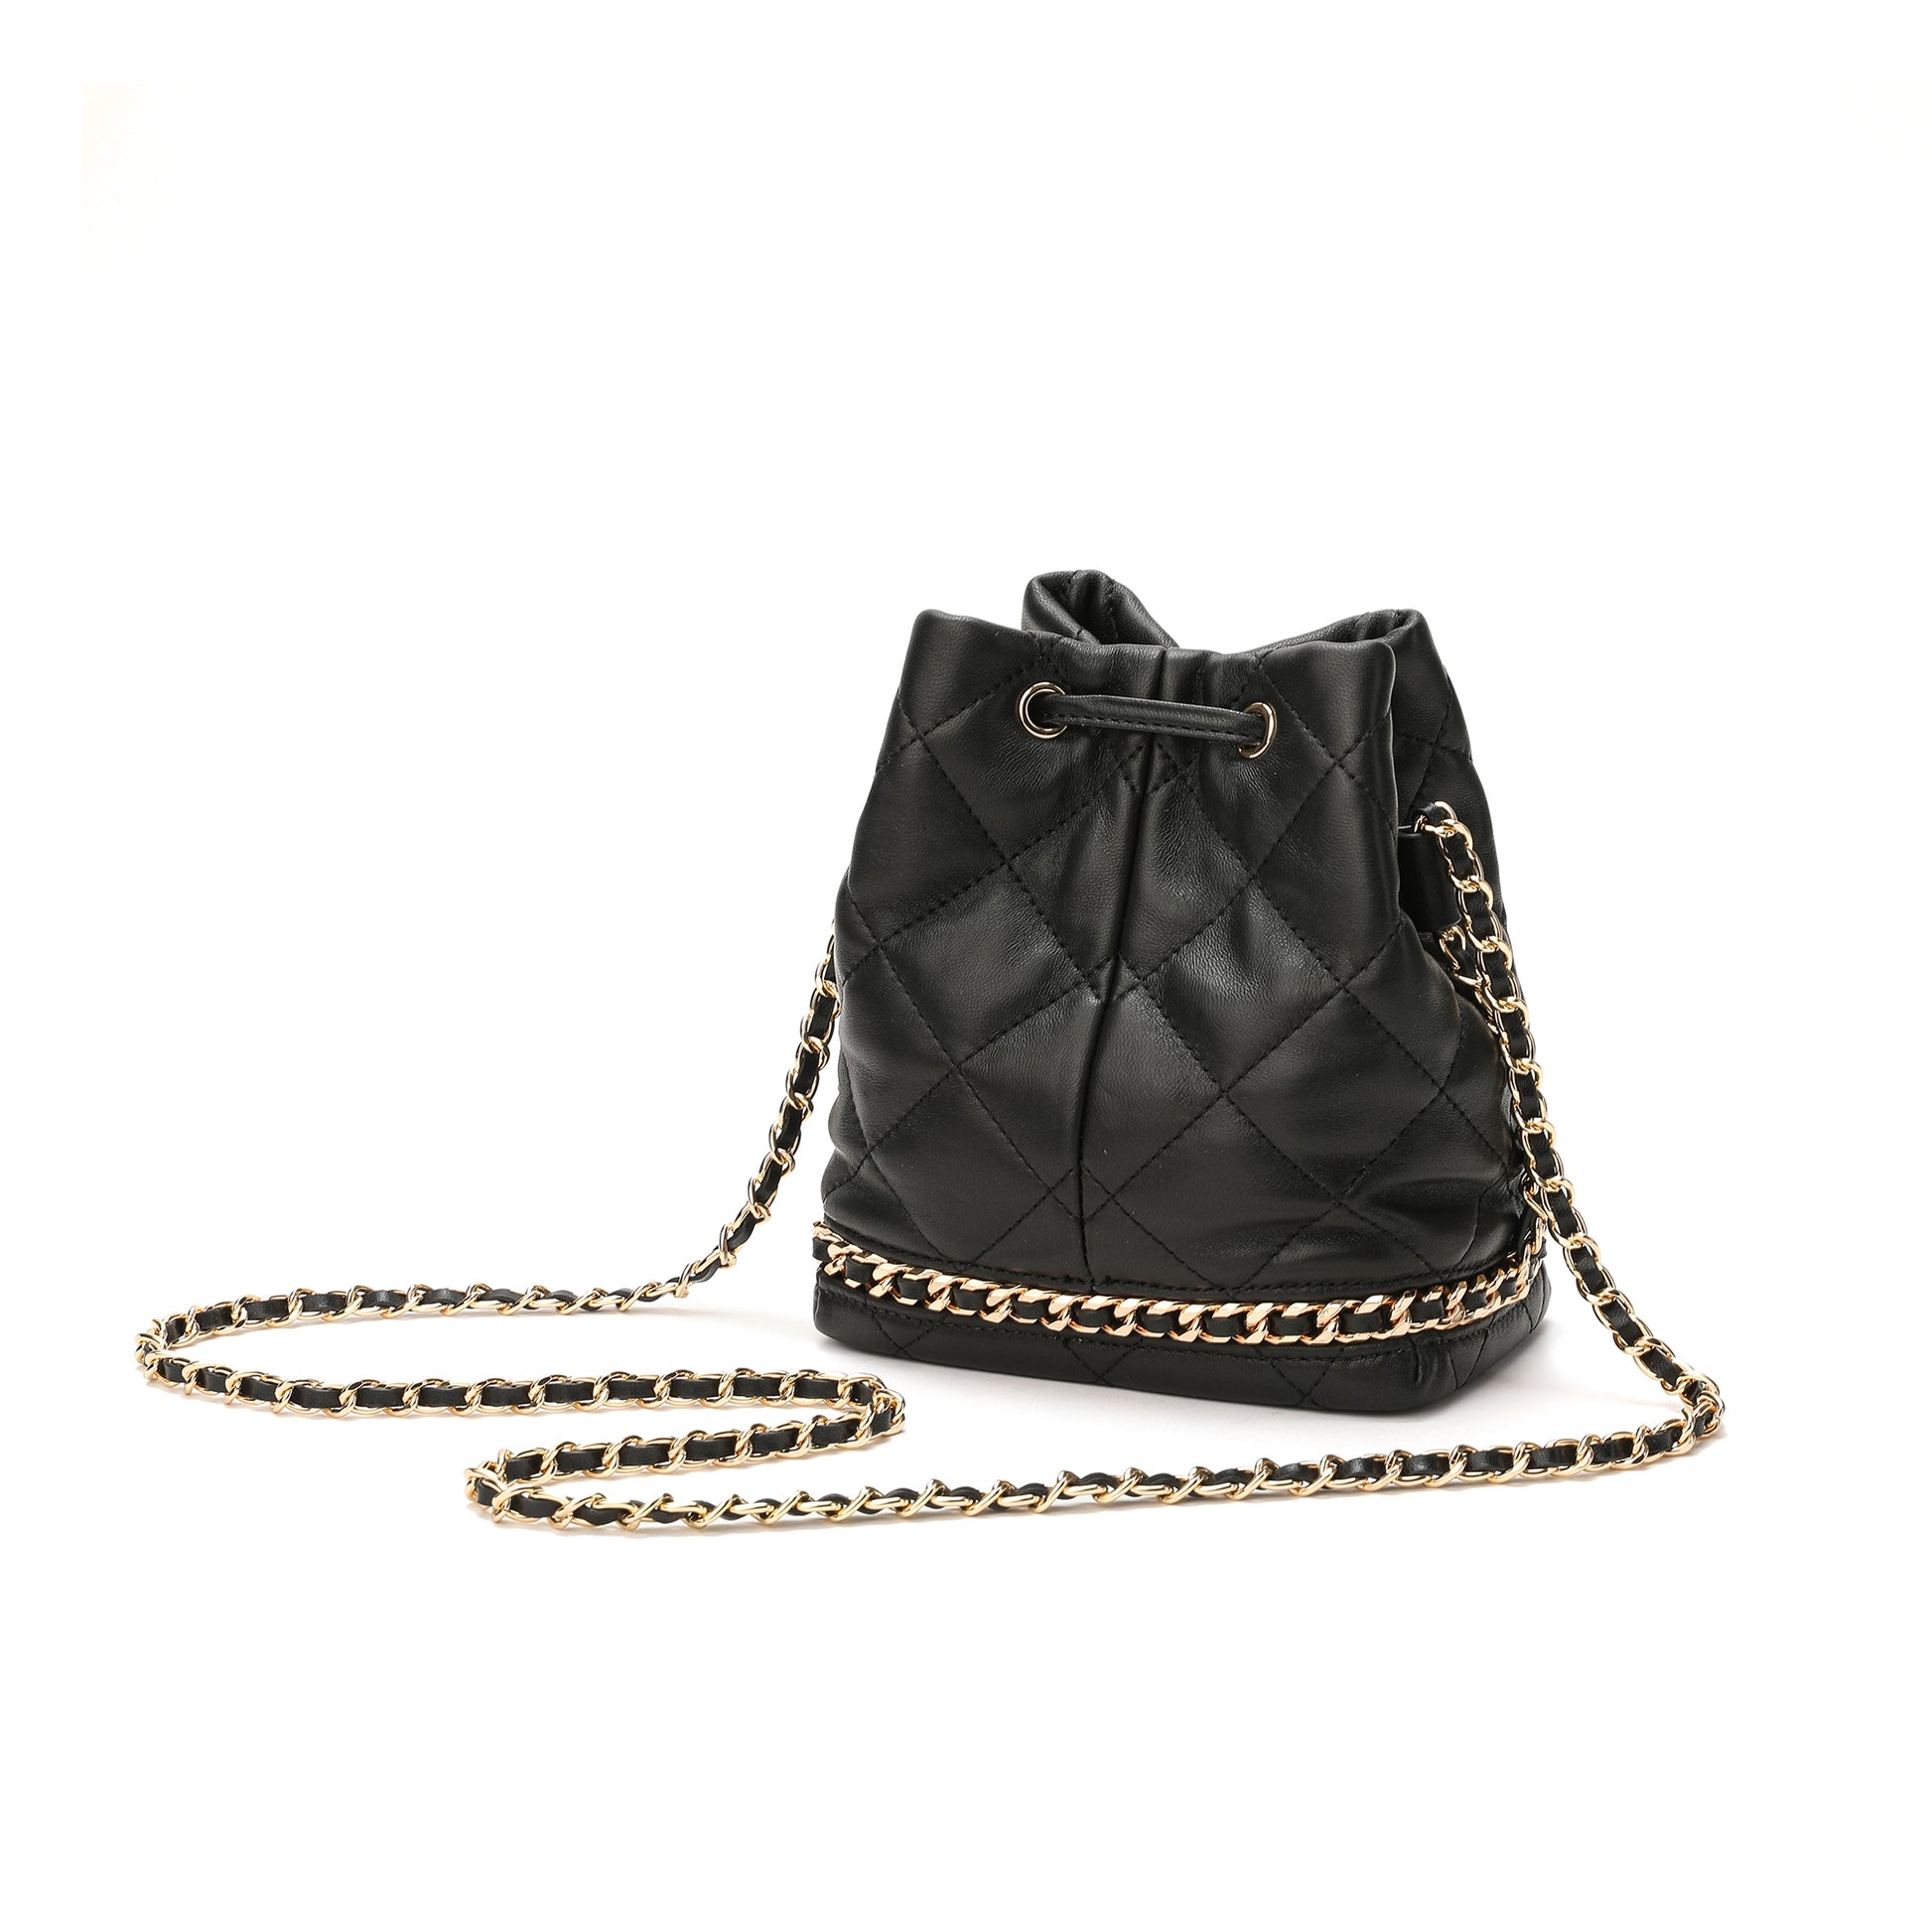 Vintage Chanel CC 1986-88 Black Quilted Leather Canvas Drawstring Bucket Bag